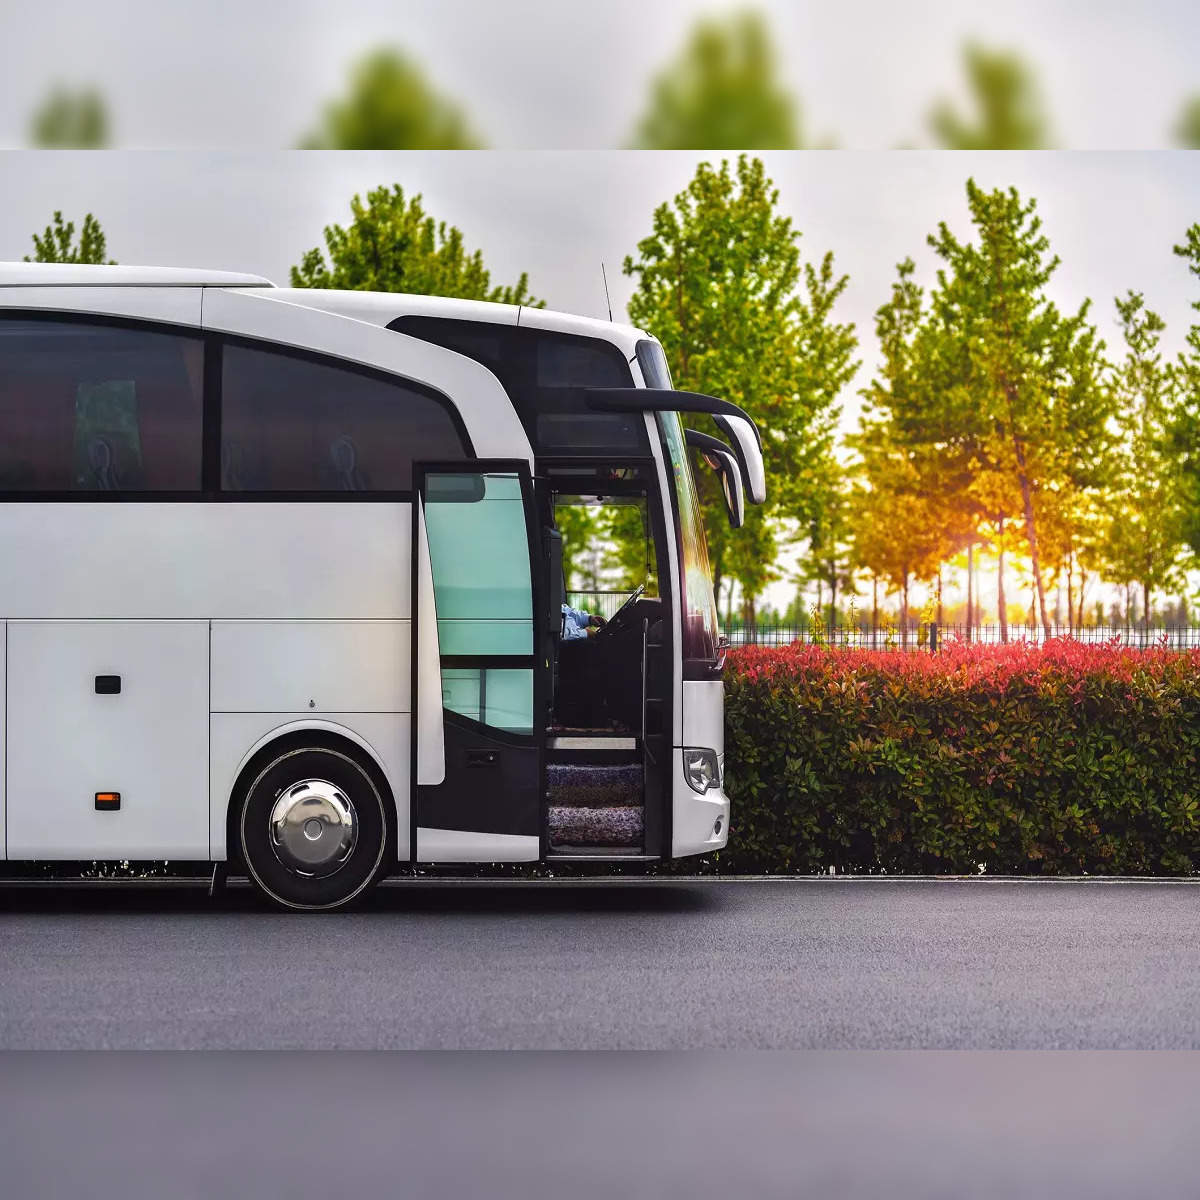 2019 MAN TGE Intercity Passenger Bus Editorial Photography - Image of  transport, industry: 129923687